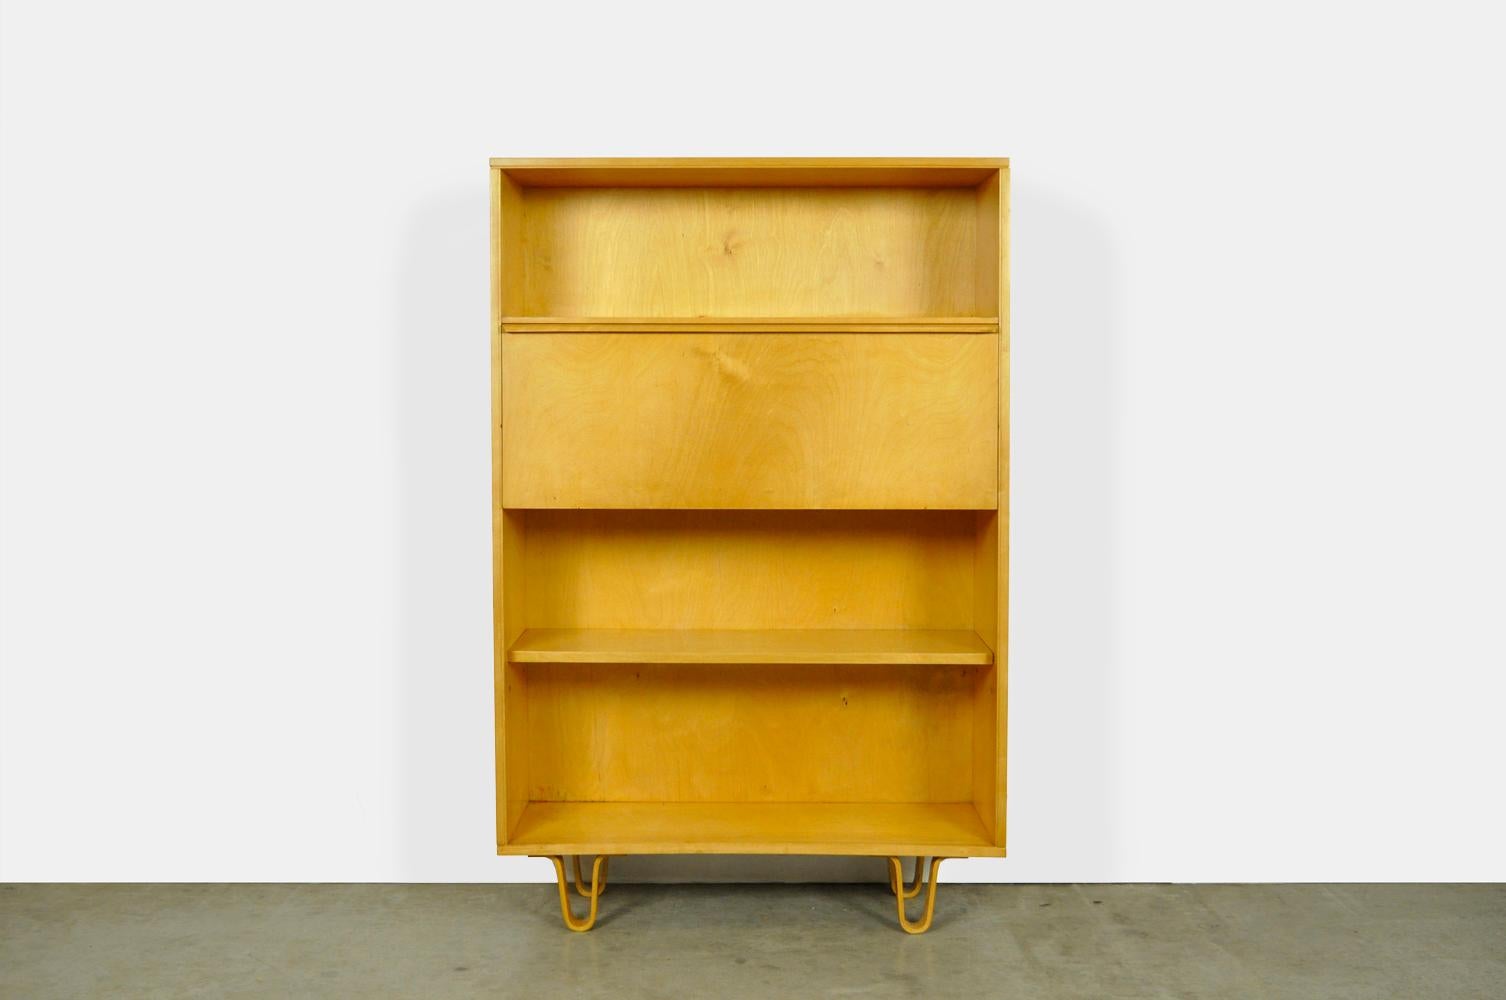 Vintage birch series secretary BB04, designed by Cees Braakman for Pastoe, 1950s. 

The cabinet with worktop has a birch veneer finish and stands on the characteristic plywood loop legs. The vintage Pastoe furniture belongs to the first owner and is